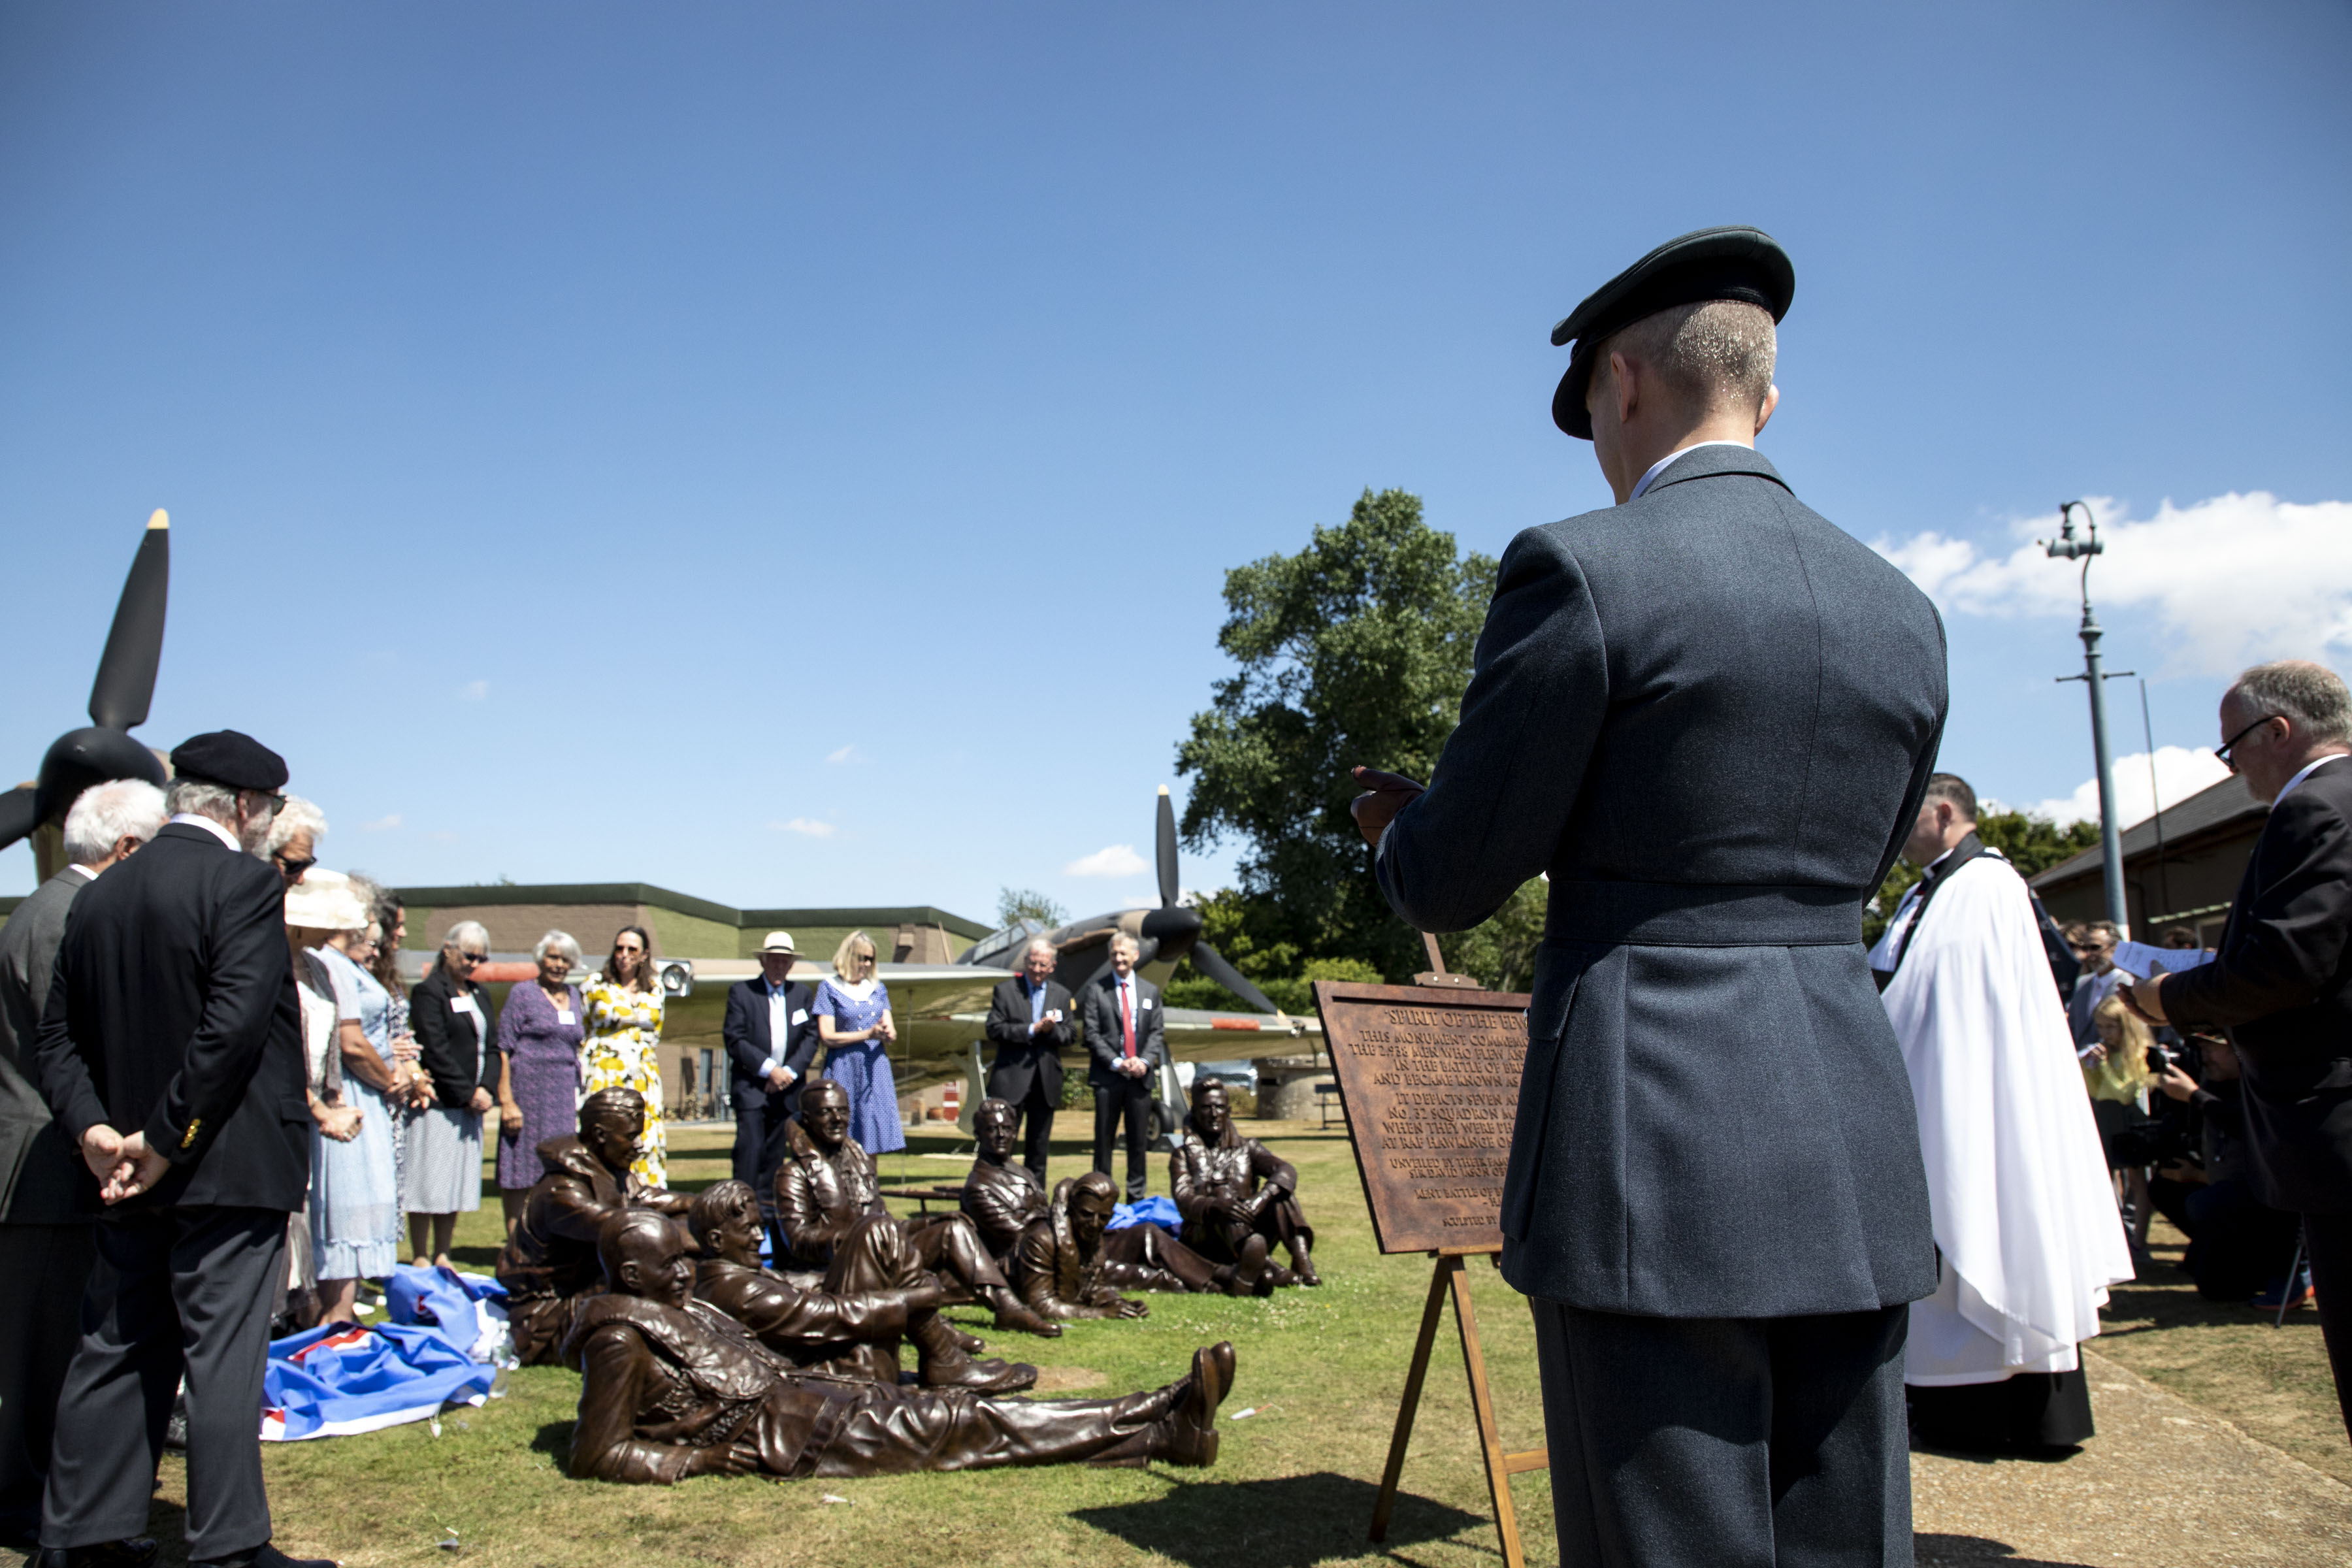 Image shows aviators and members of the public with the bronze sculptures and commemorative plaque